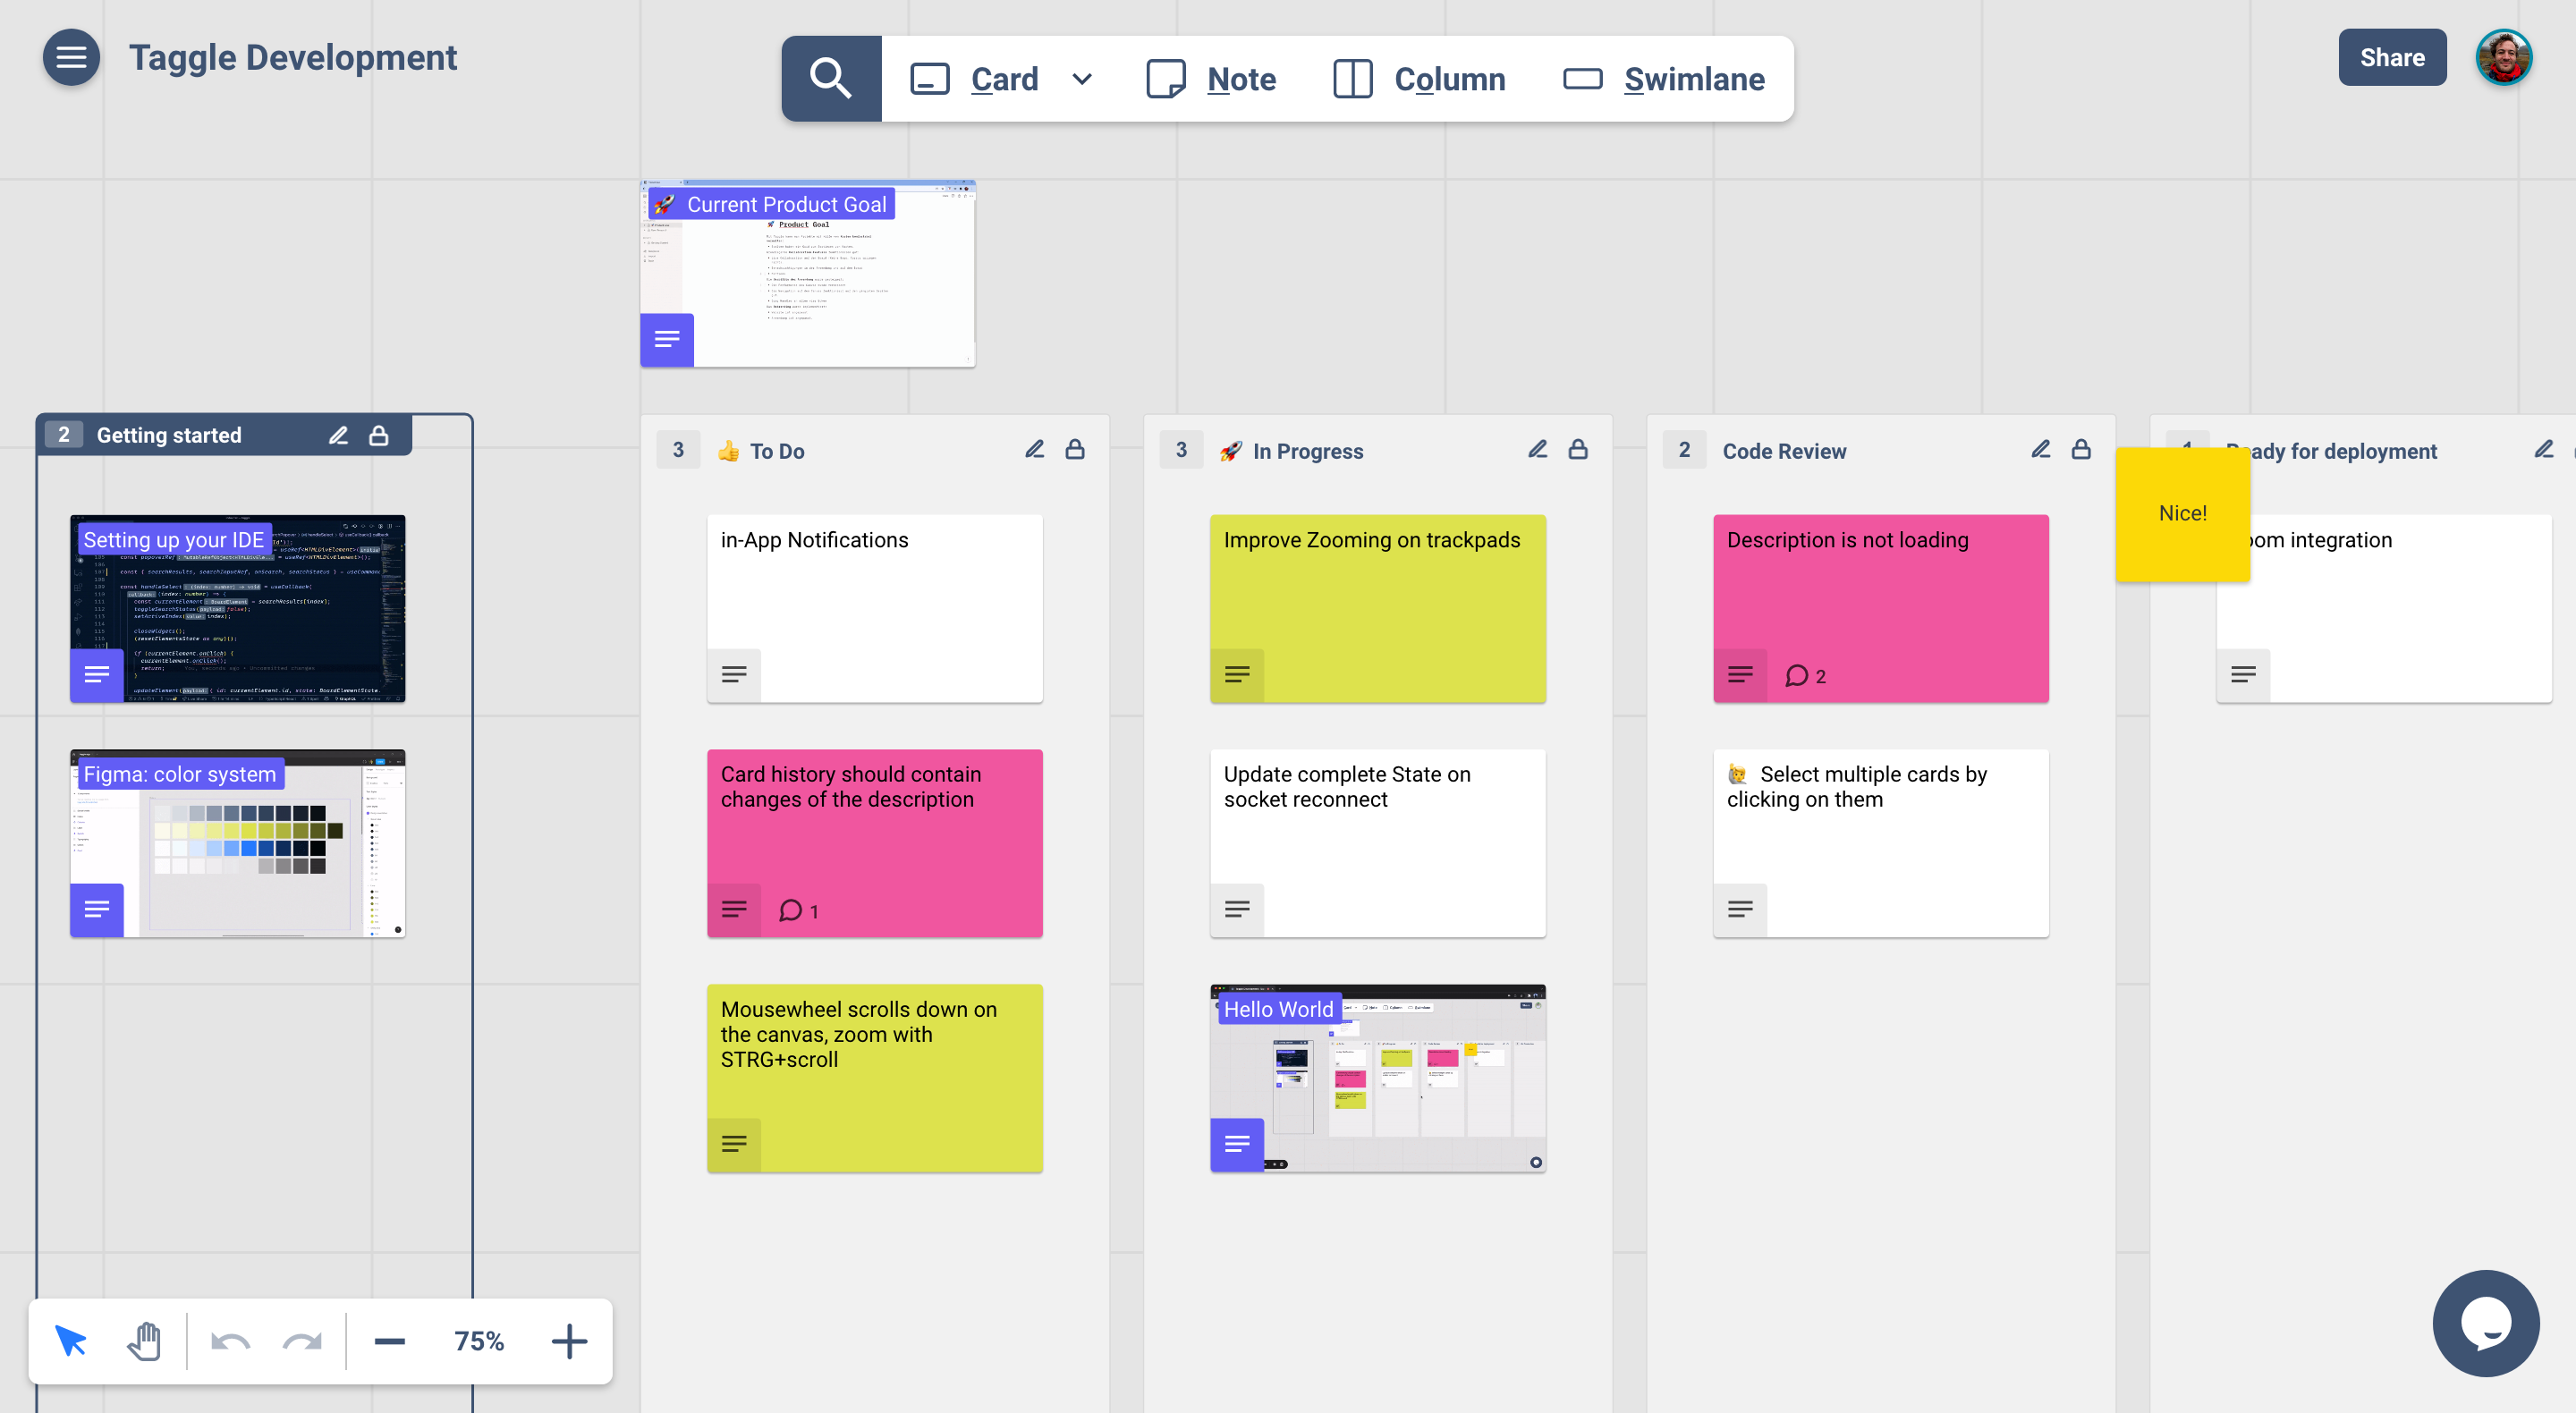 A screenshot of a colorful whiteboard like web application that also includes a kanban flow